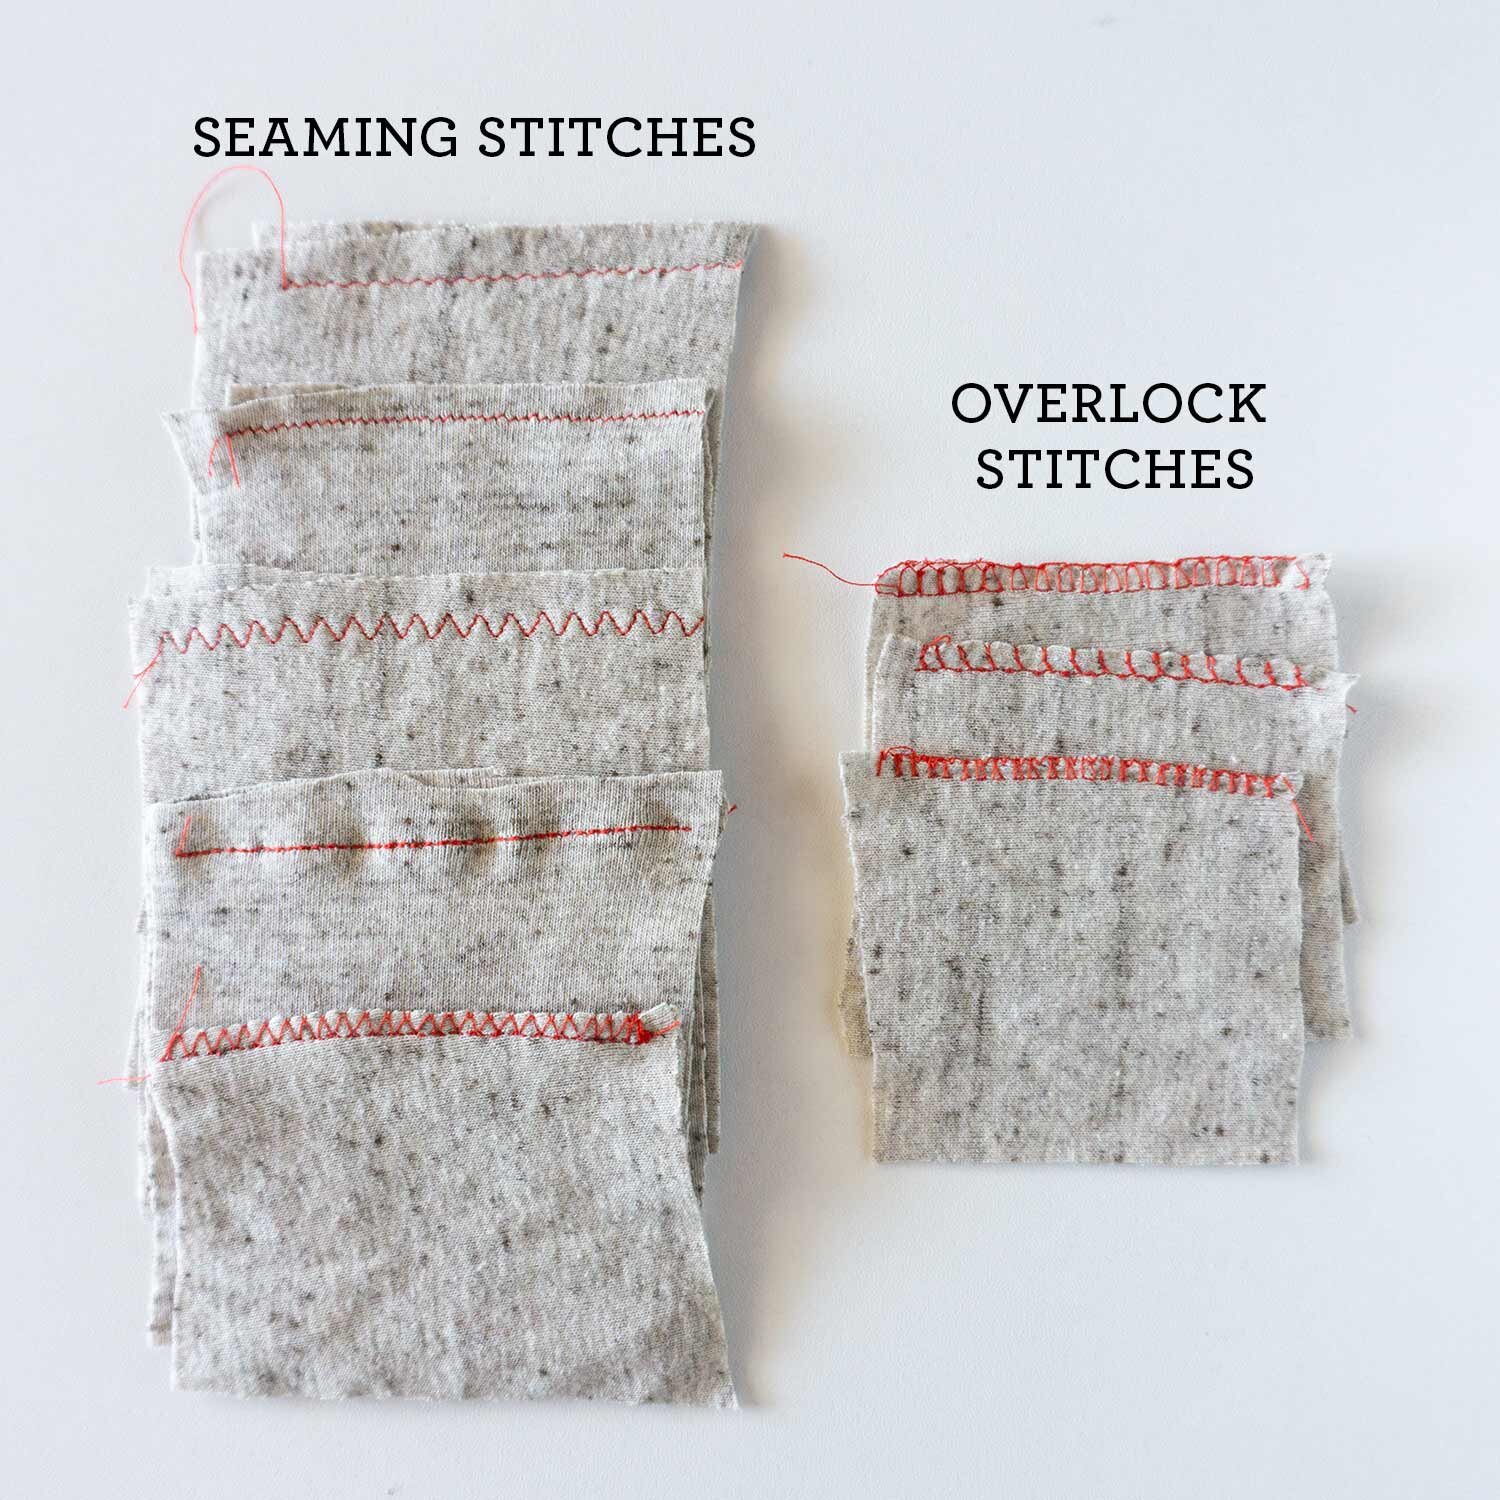 Sewing With Stretchy Knits